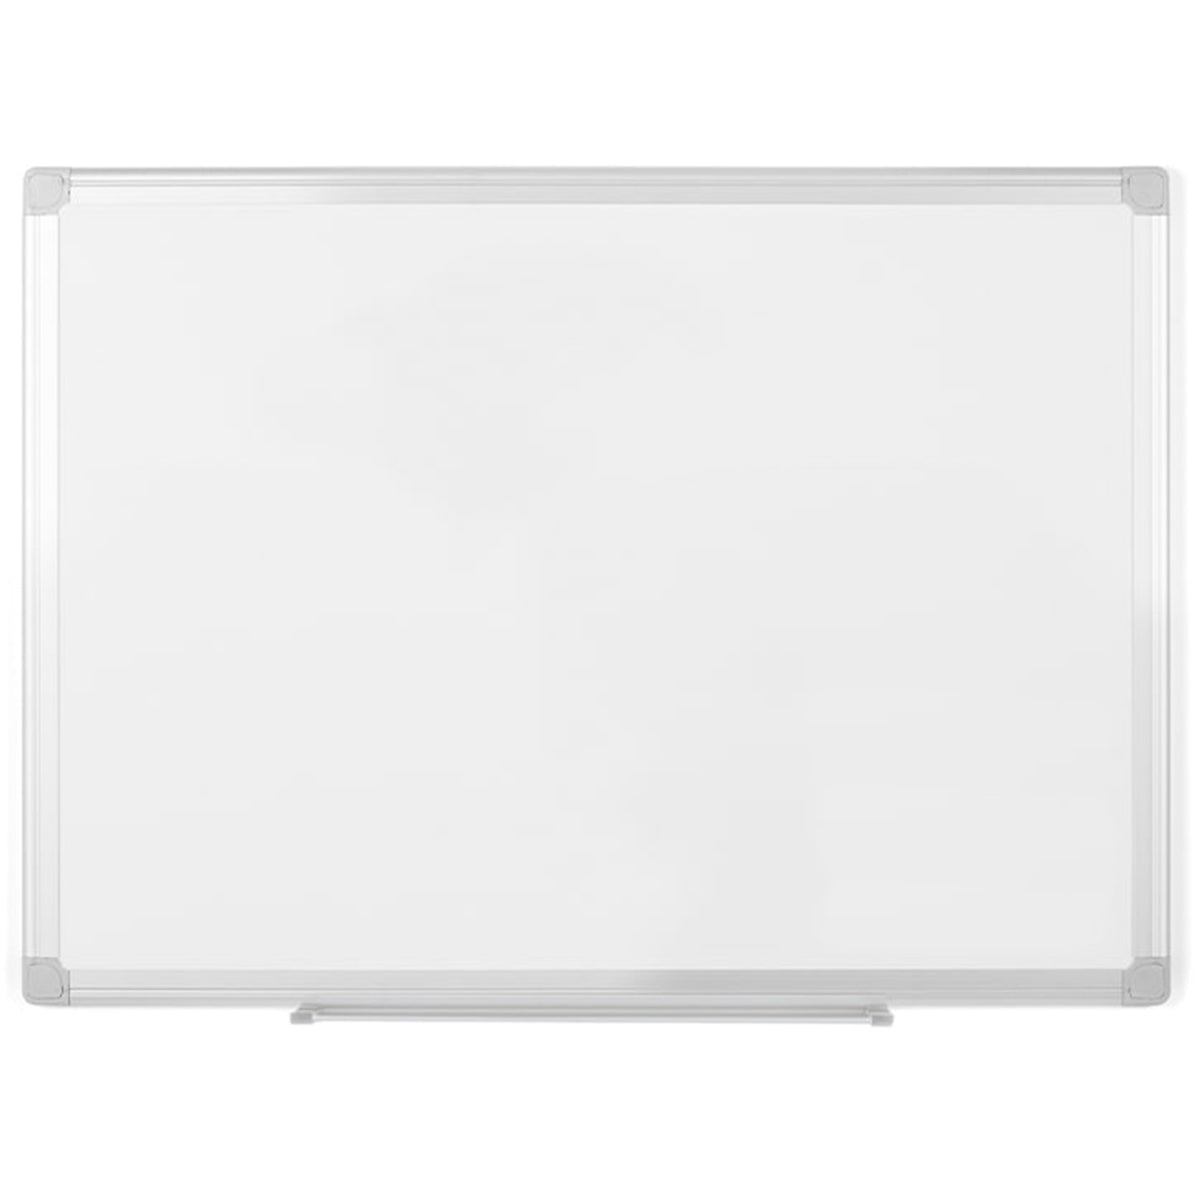 MA0307790 Earth Series Magnetic Laquered Steel Dry Erase Board, 100% Recycled Frame, Snap-On Marker Tray, 24" x 36", Aluminum Frame by MasterVision